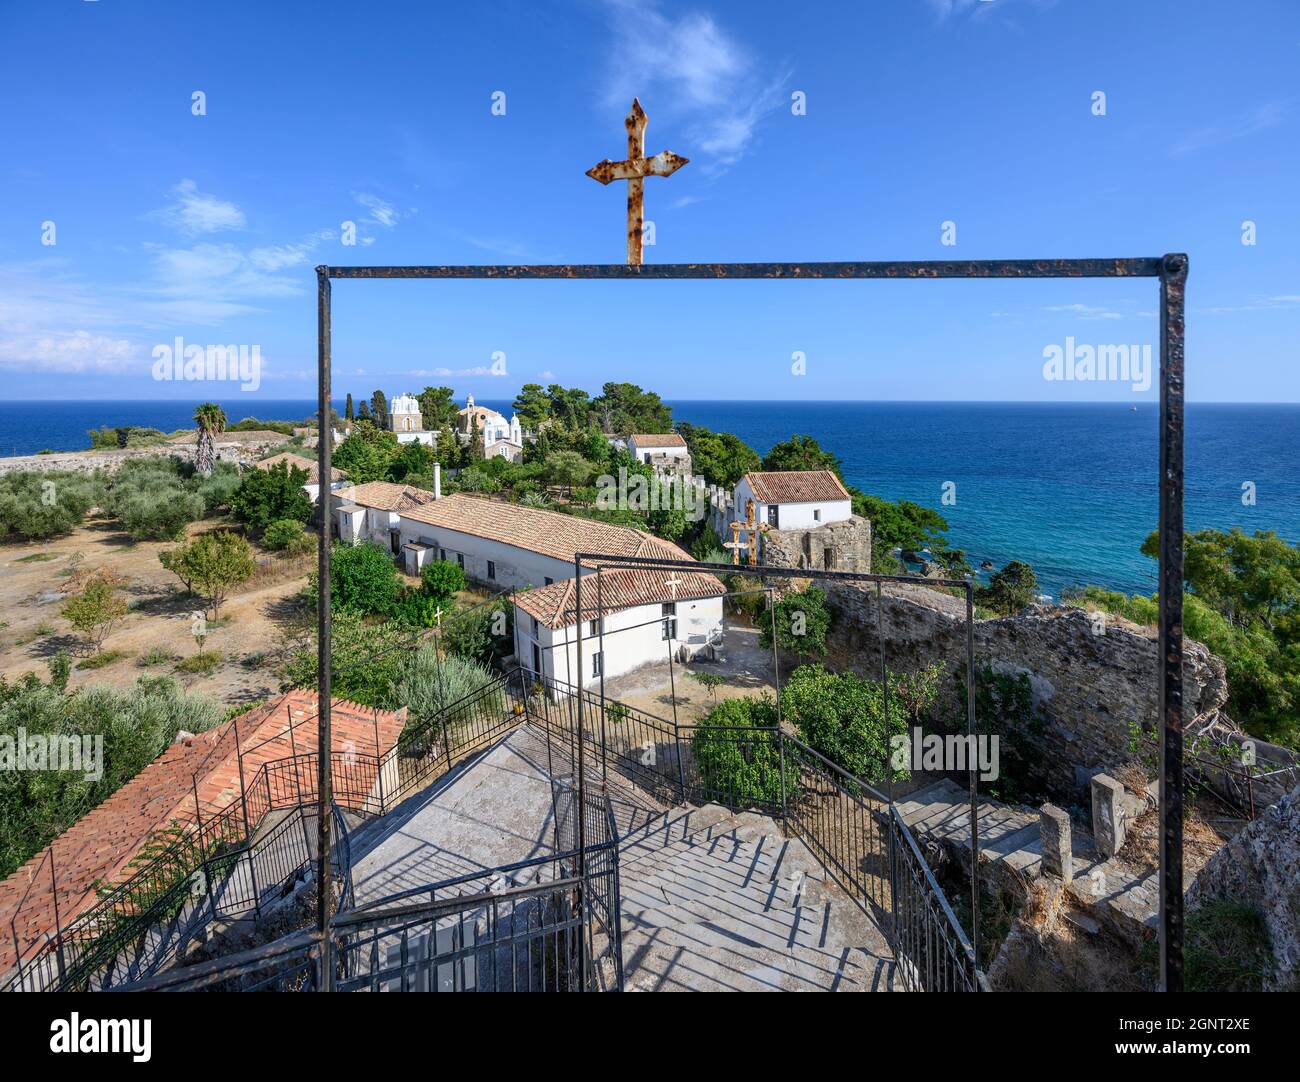 Prodromos High Resolution Stock Photography and Images - Alamy